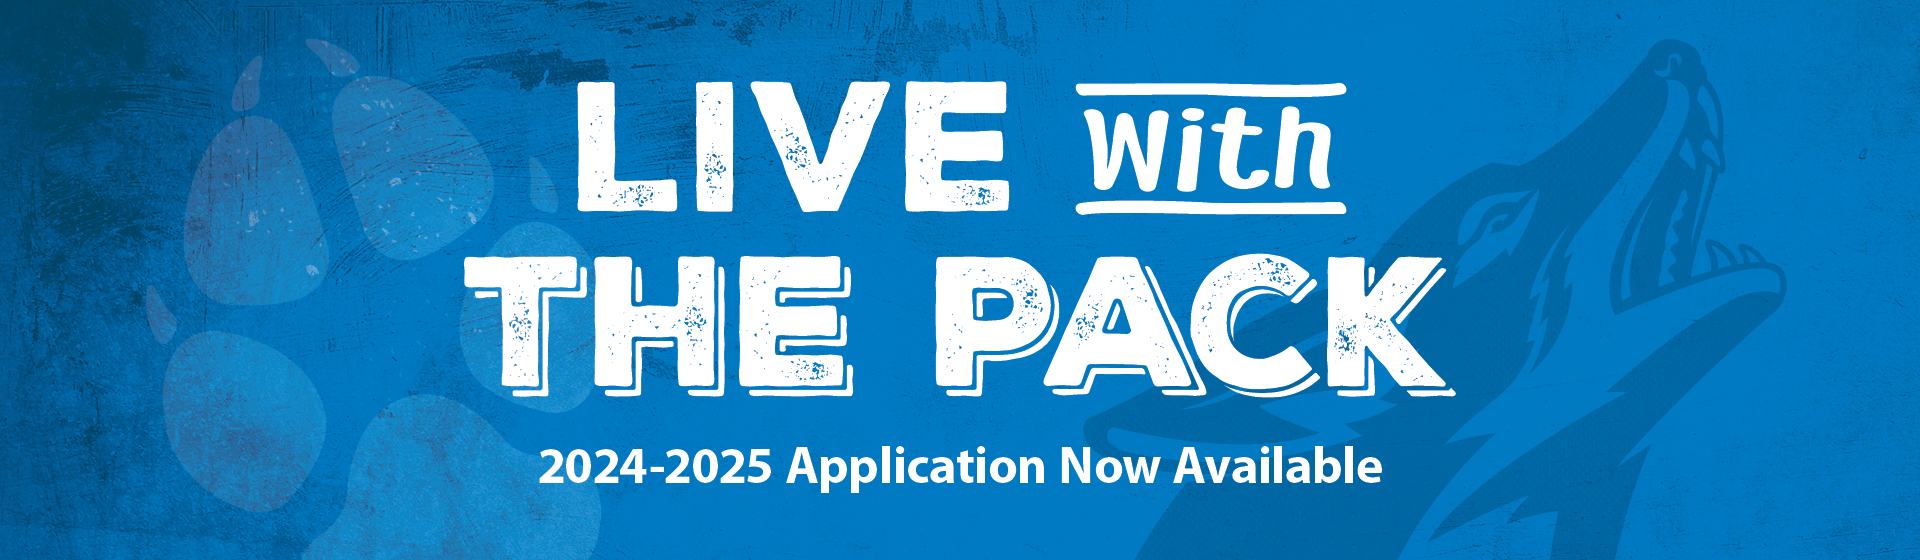 Live with the Pack: 2024-2025 Application Now Available